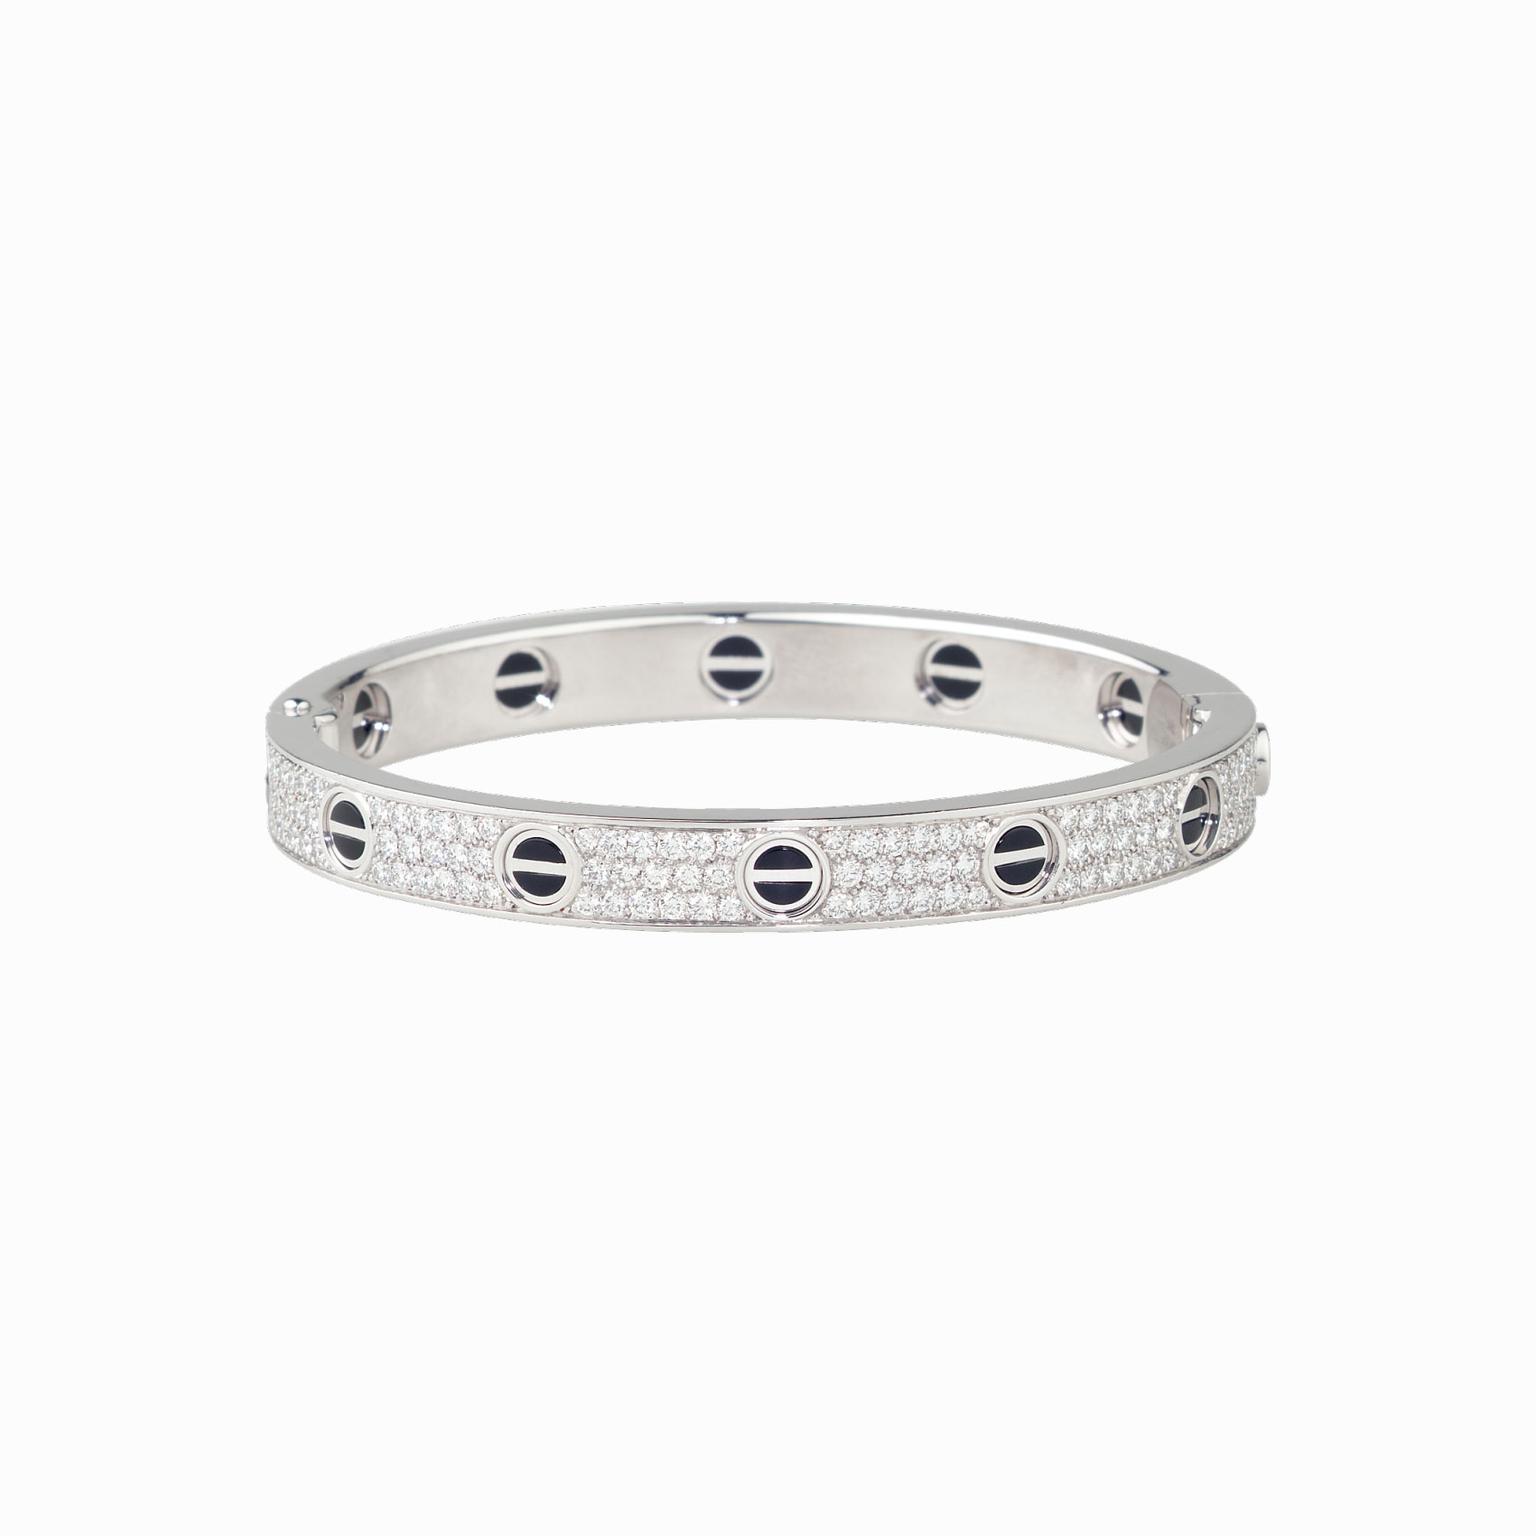 Love Bracelet With Diamonds And Black Ceramic Cartier The Jewellery Editor,Picture Of A Rational Number